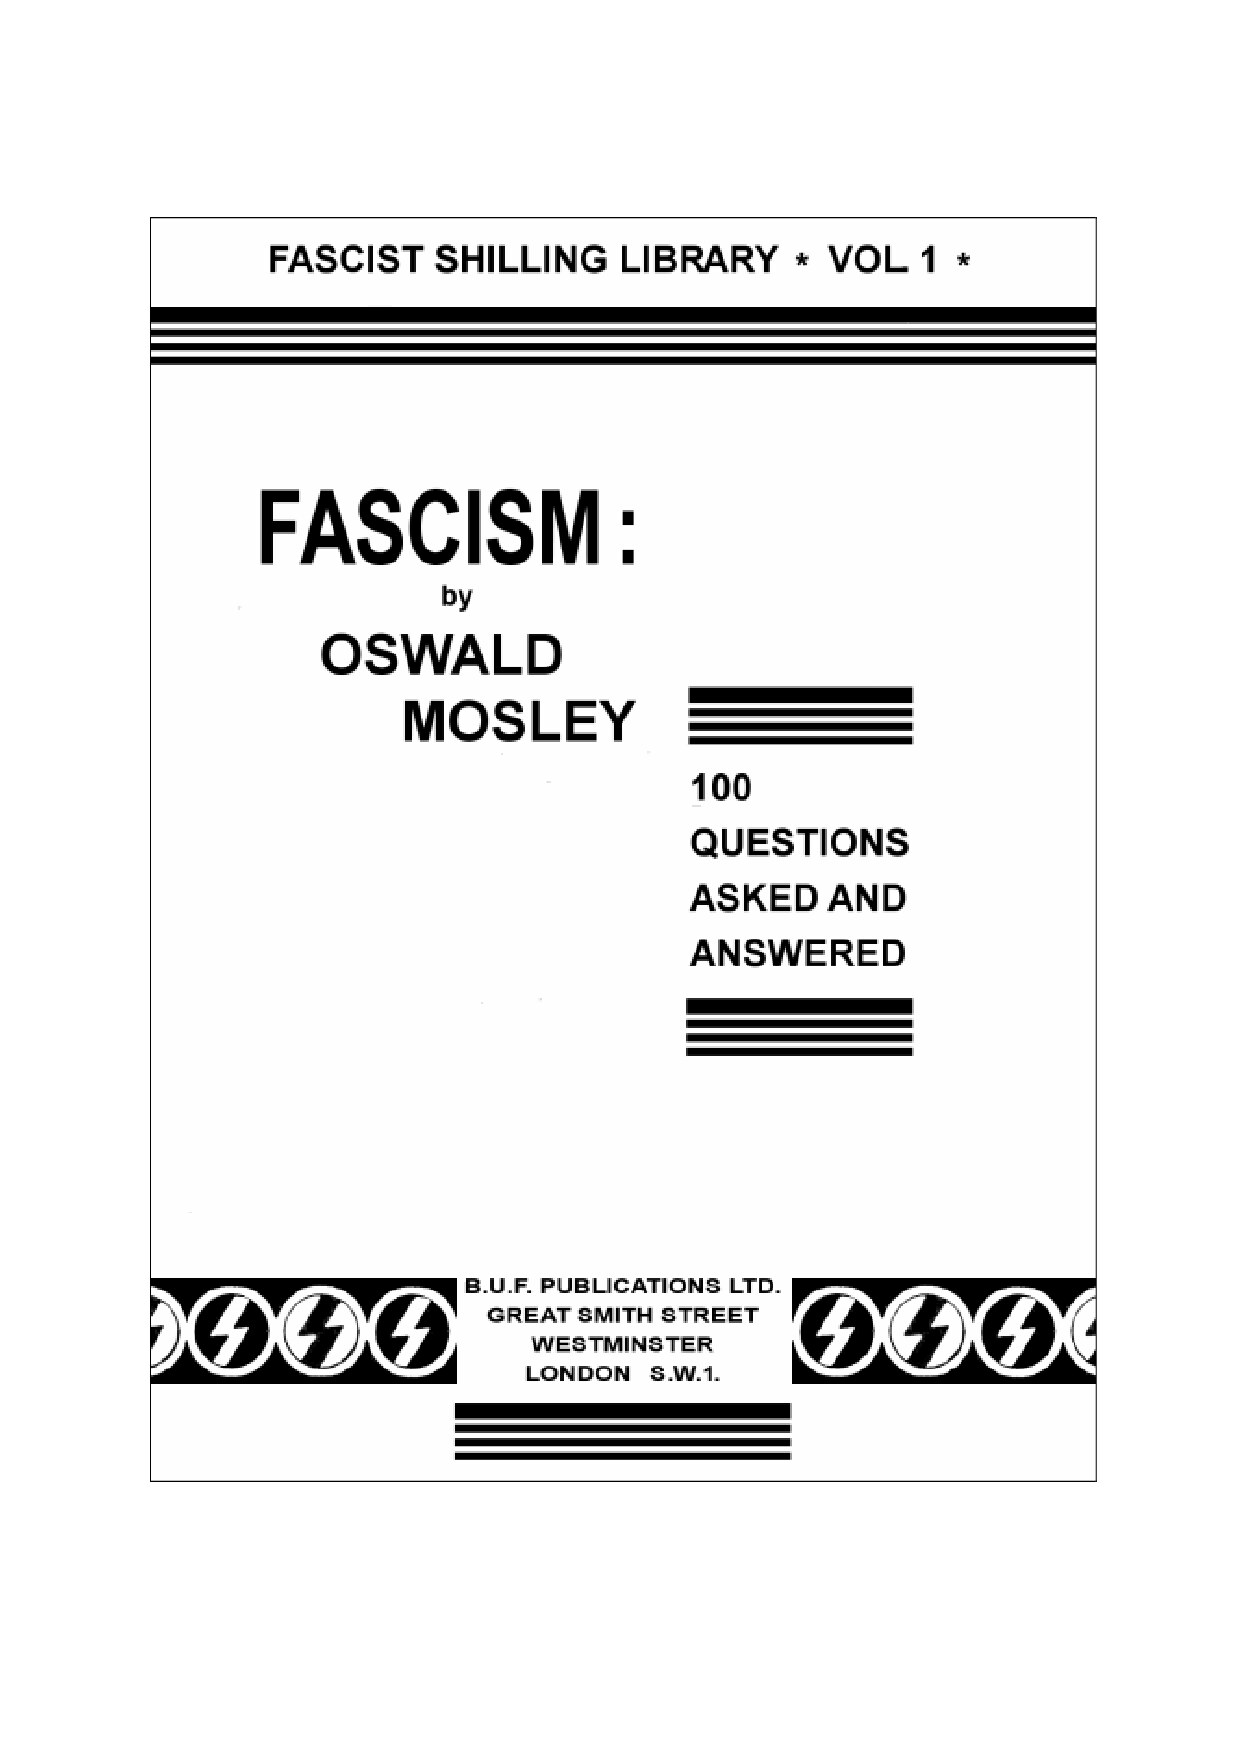 Fascism - 100 Questions Asked and Answered